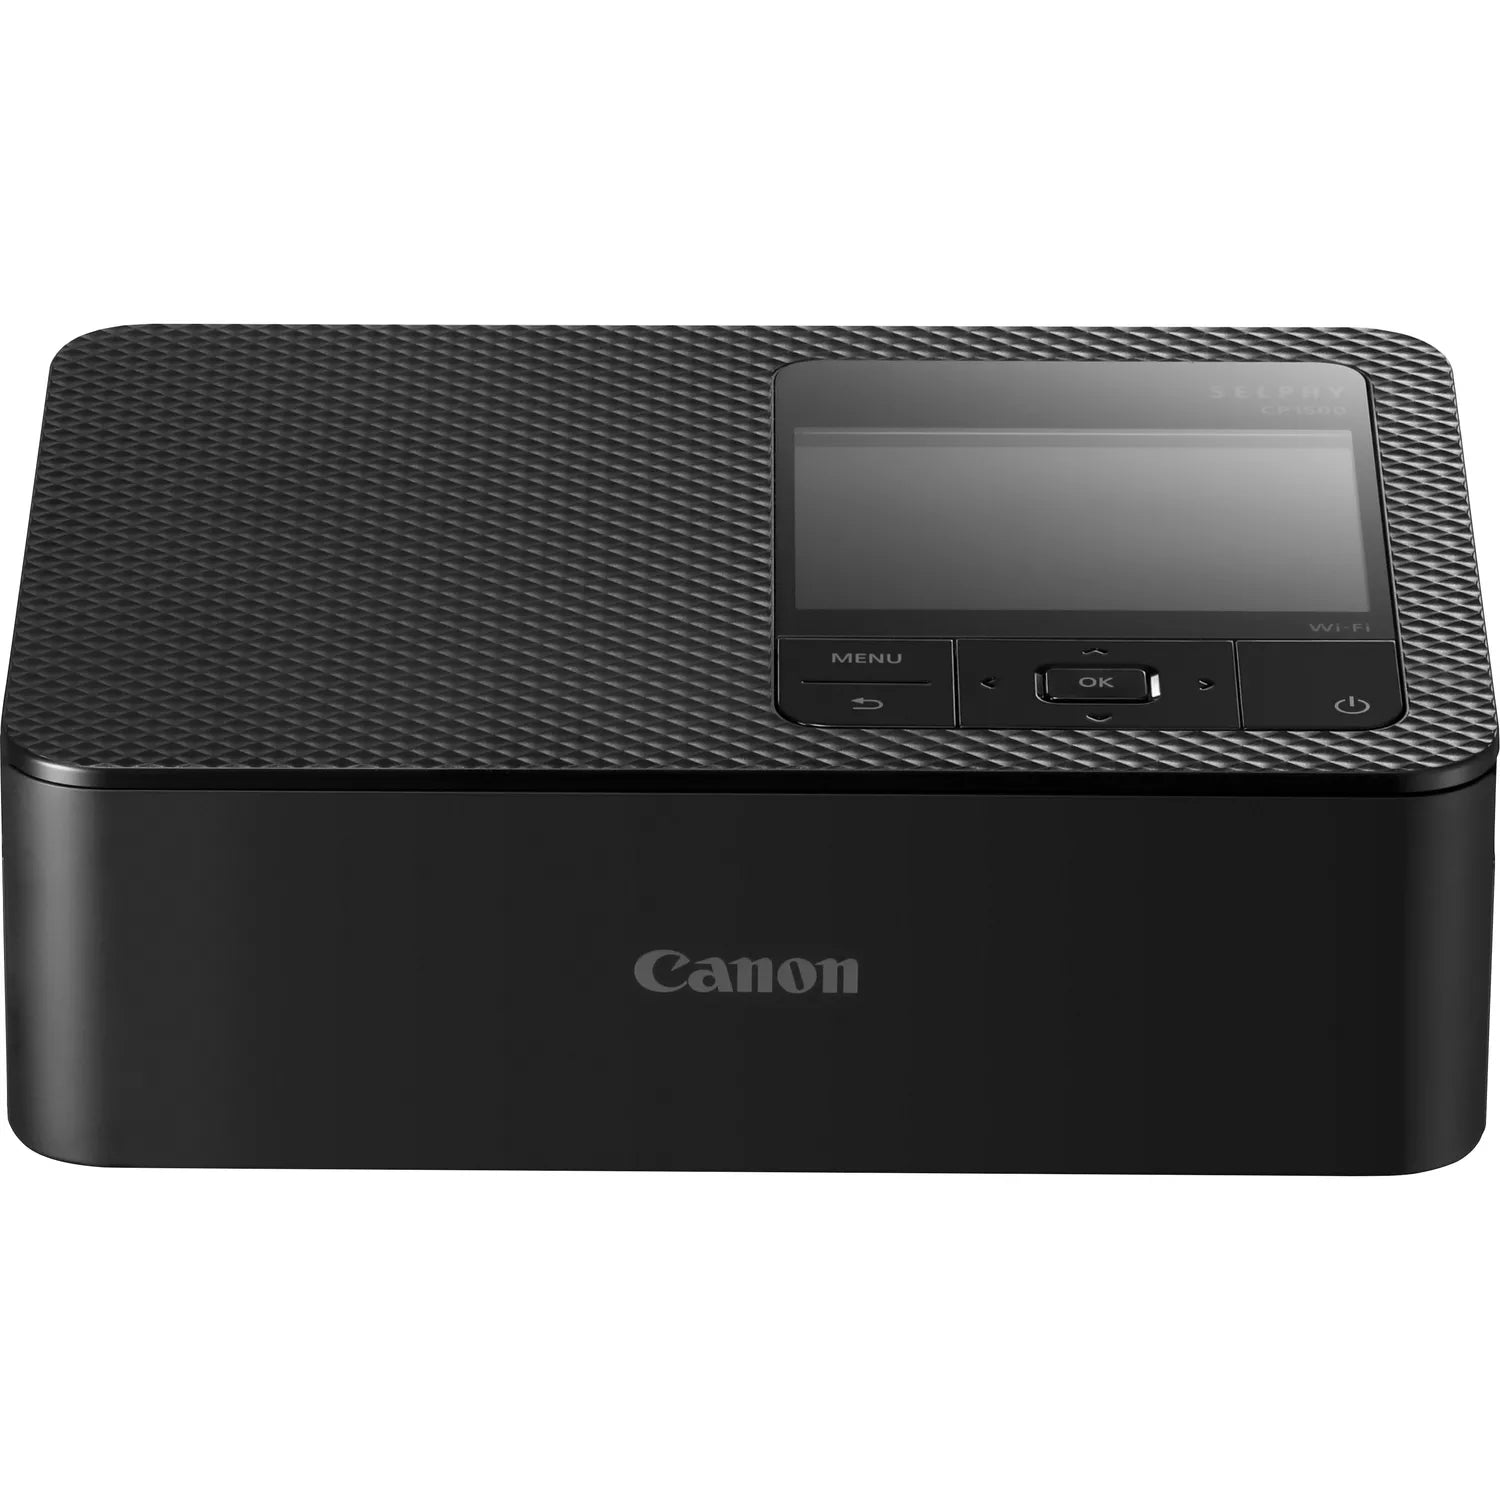 Canon SELPHY CP1500 Compact WiFi Photo Printer and RP108 kit - Black